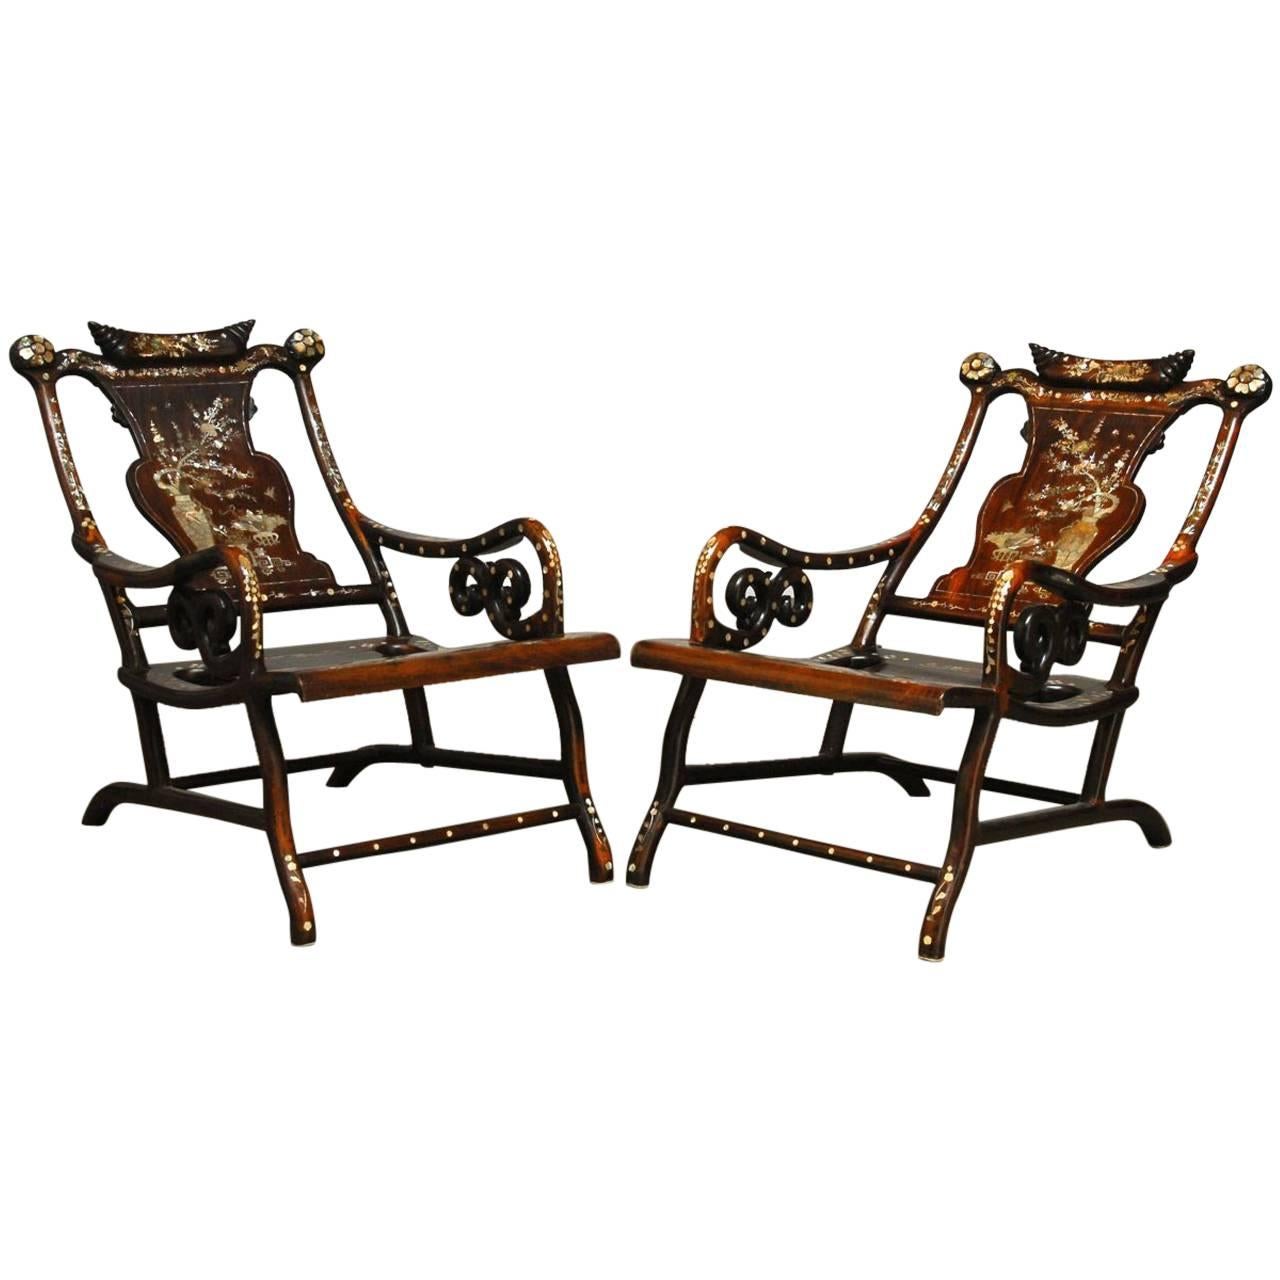 Pair of Chinese Rosewood Lounge Chairs with Mother-of-Pearl Inlay